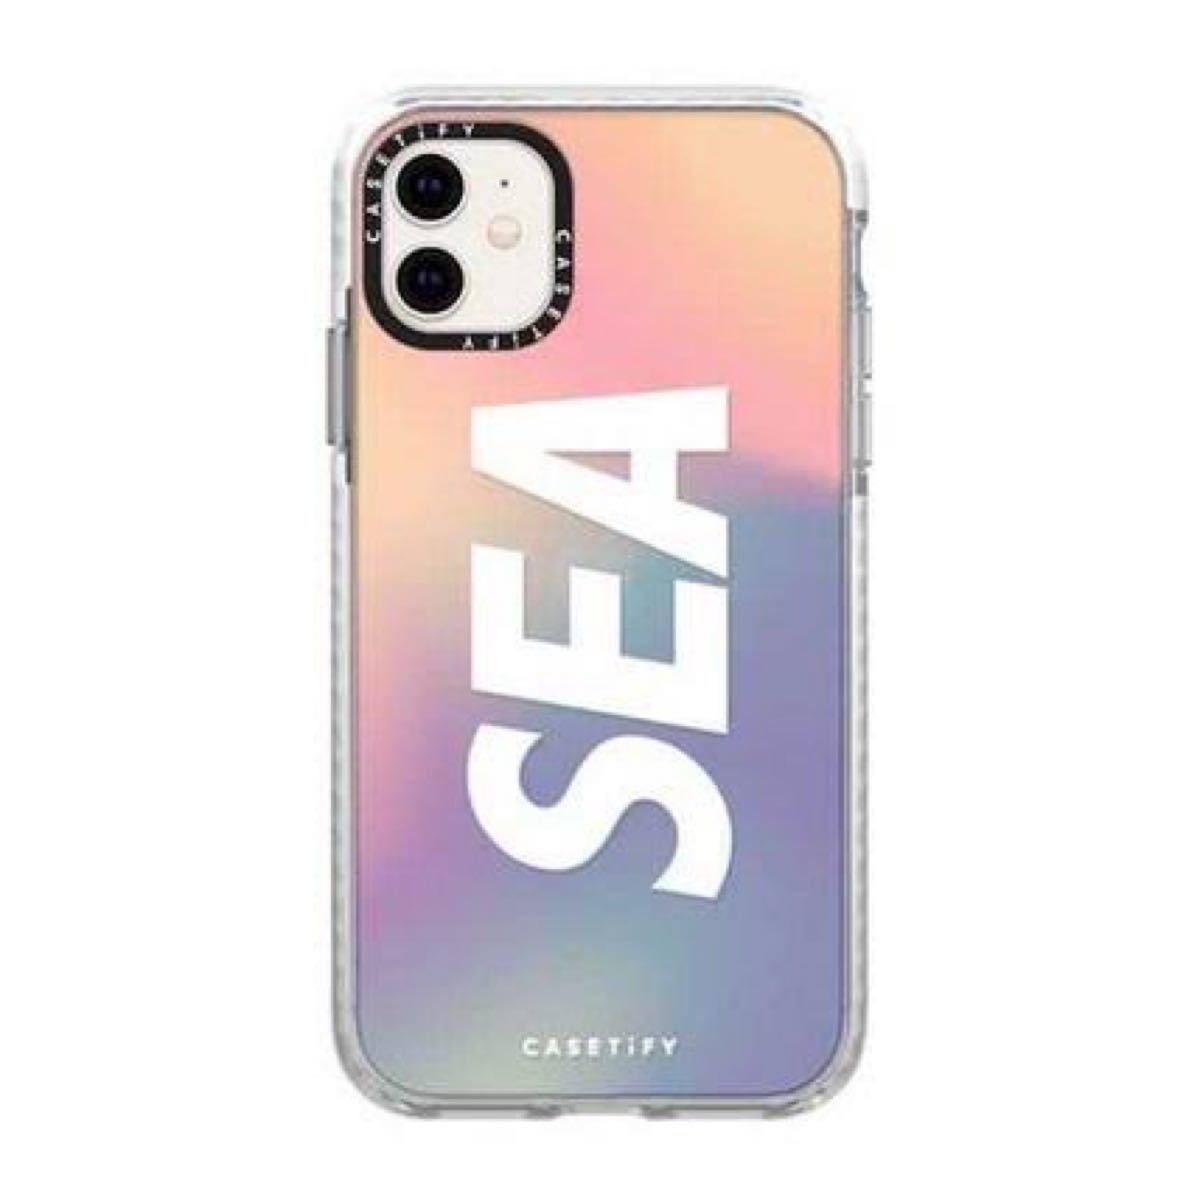 CASETiFY WIND AND SEA iPhone12 pro スマホケース